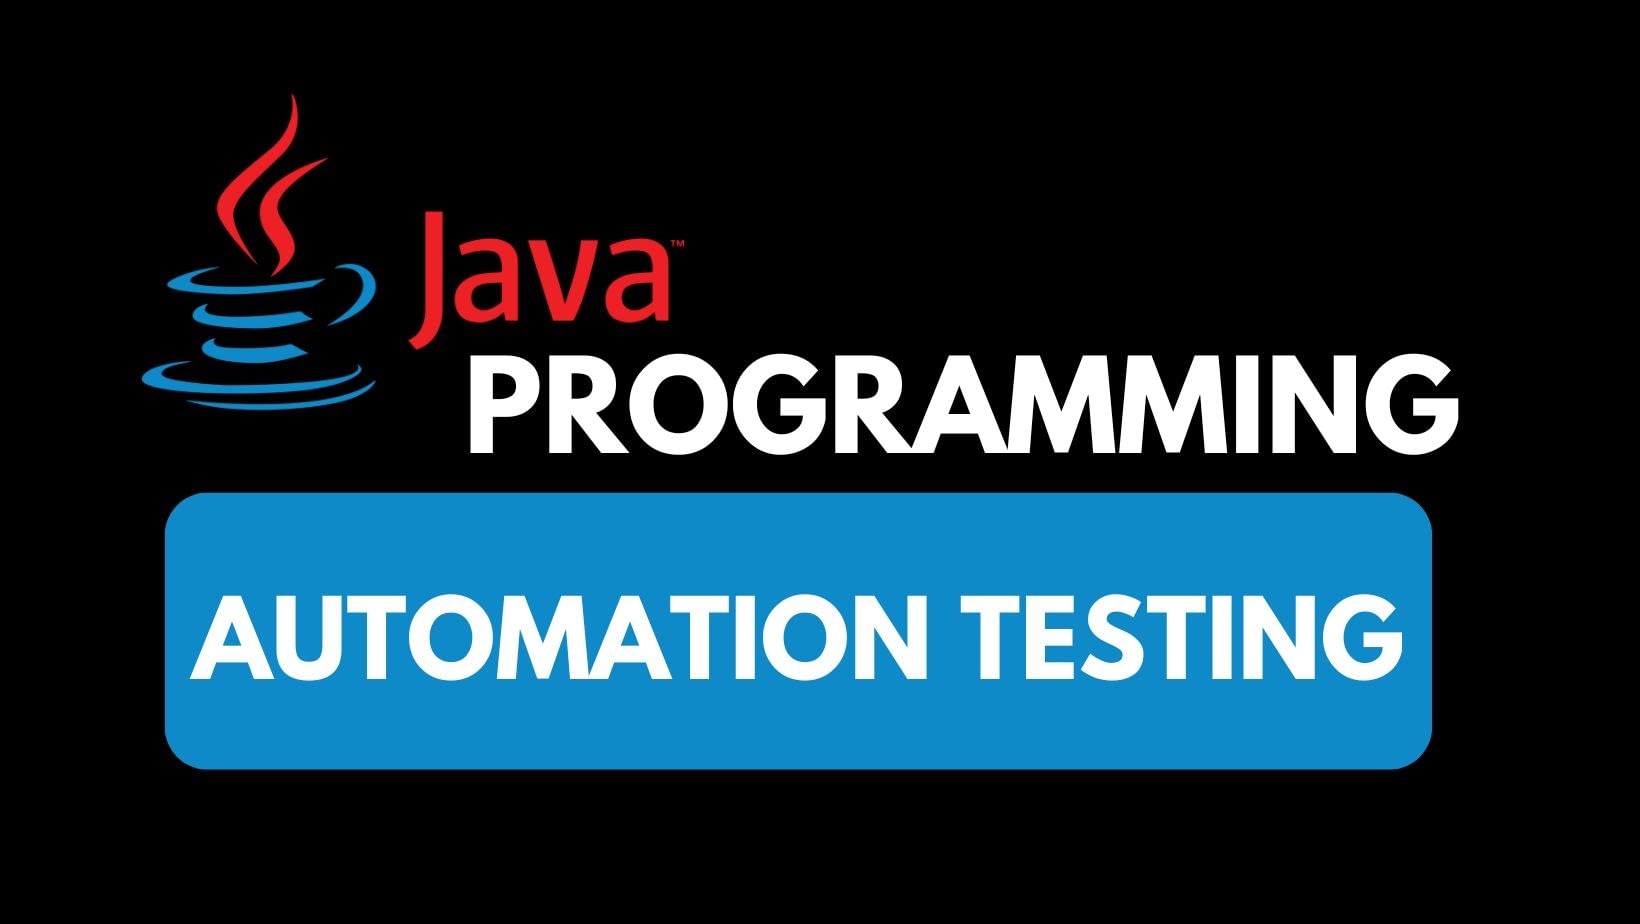 Java for Automation Testing